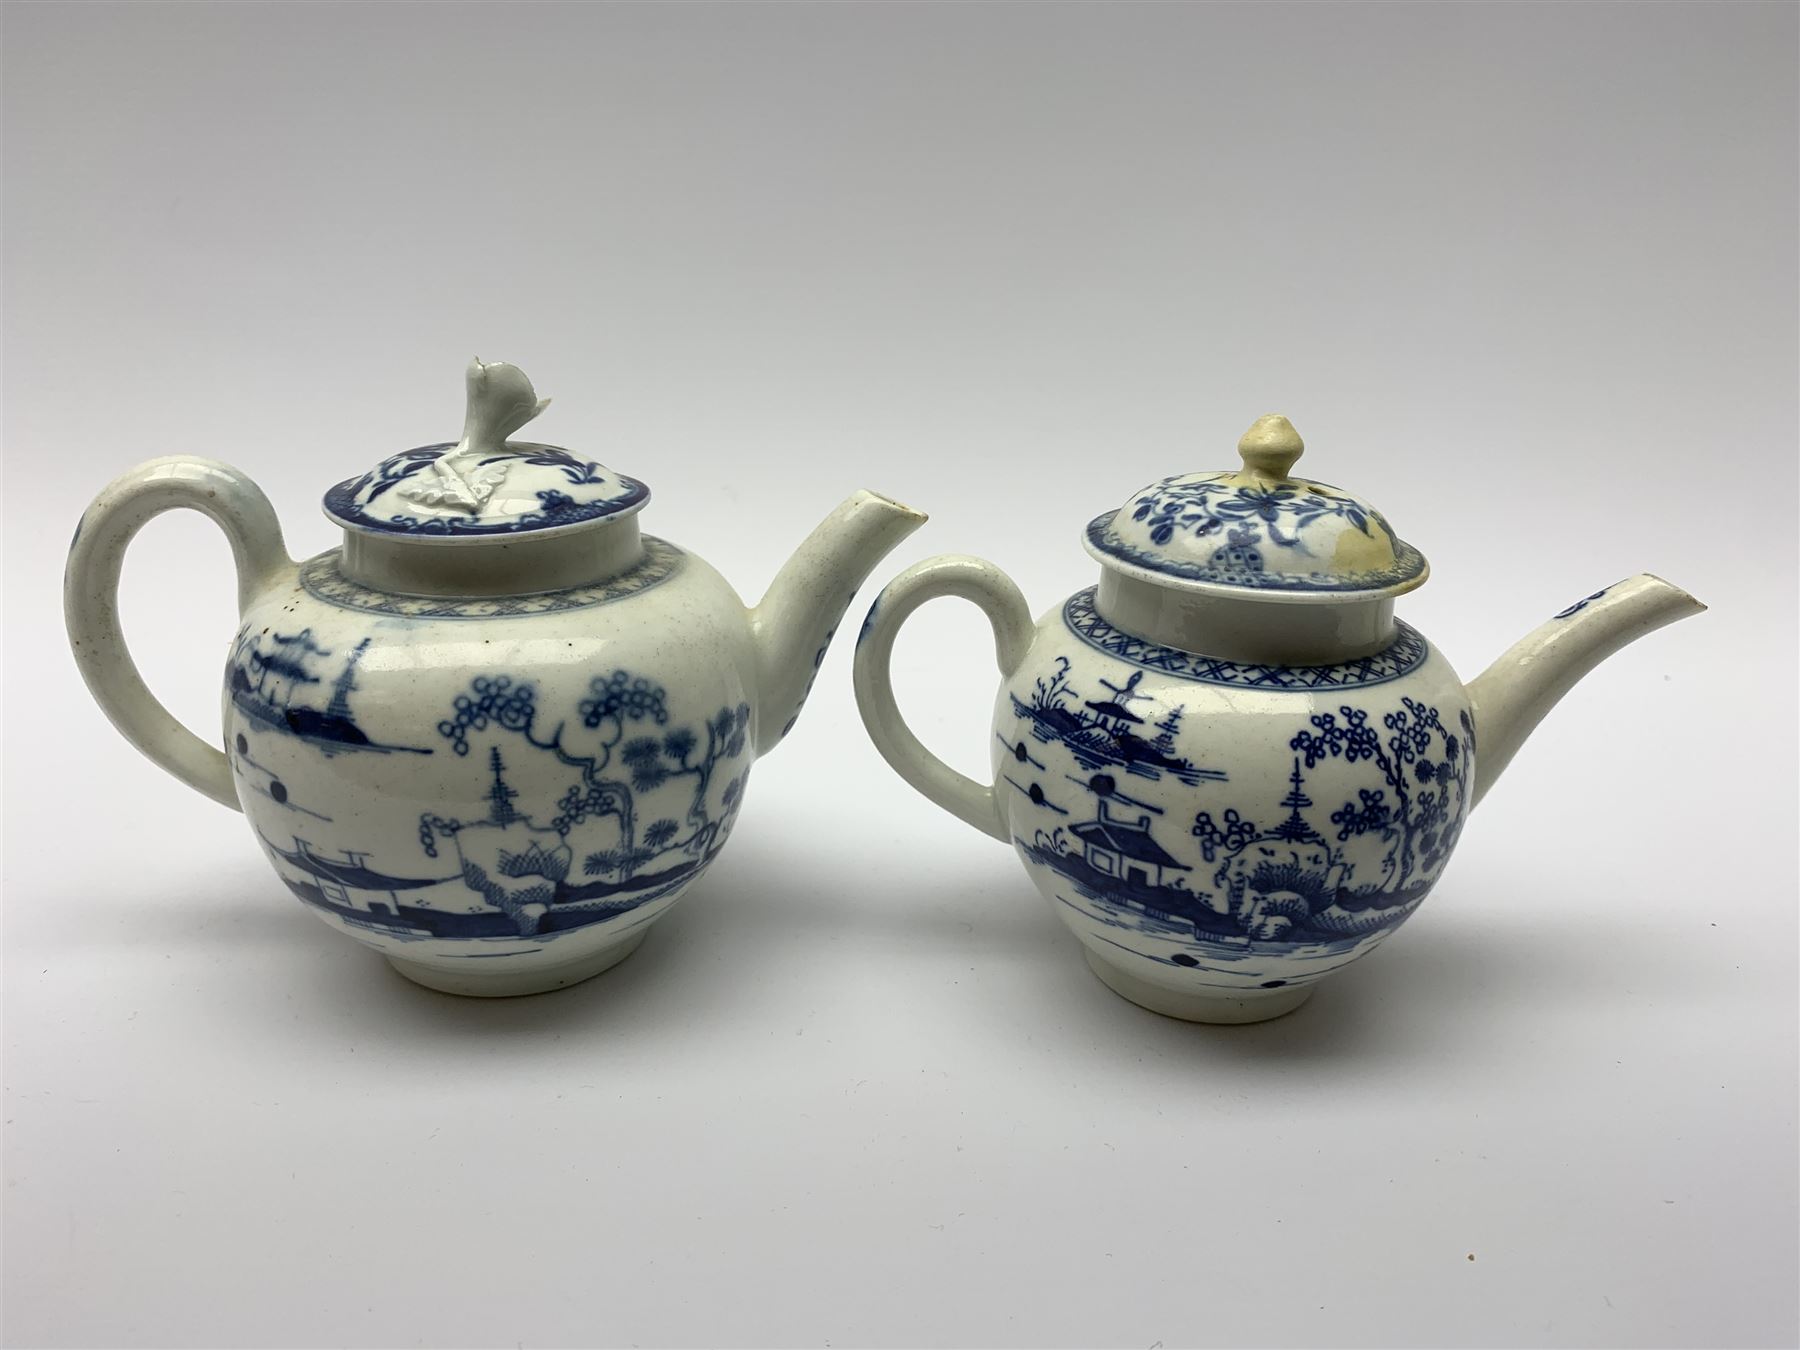 Two small 18th century Worcester teapots - Image 3 of 8